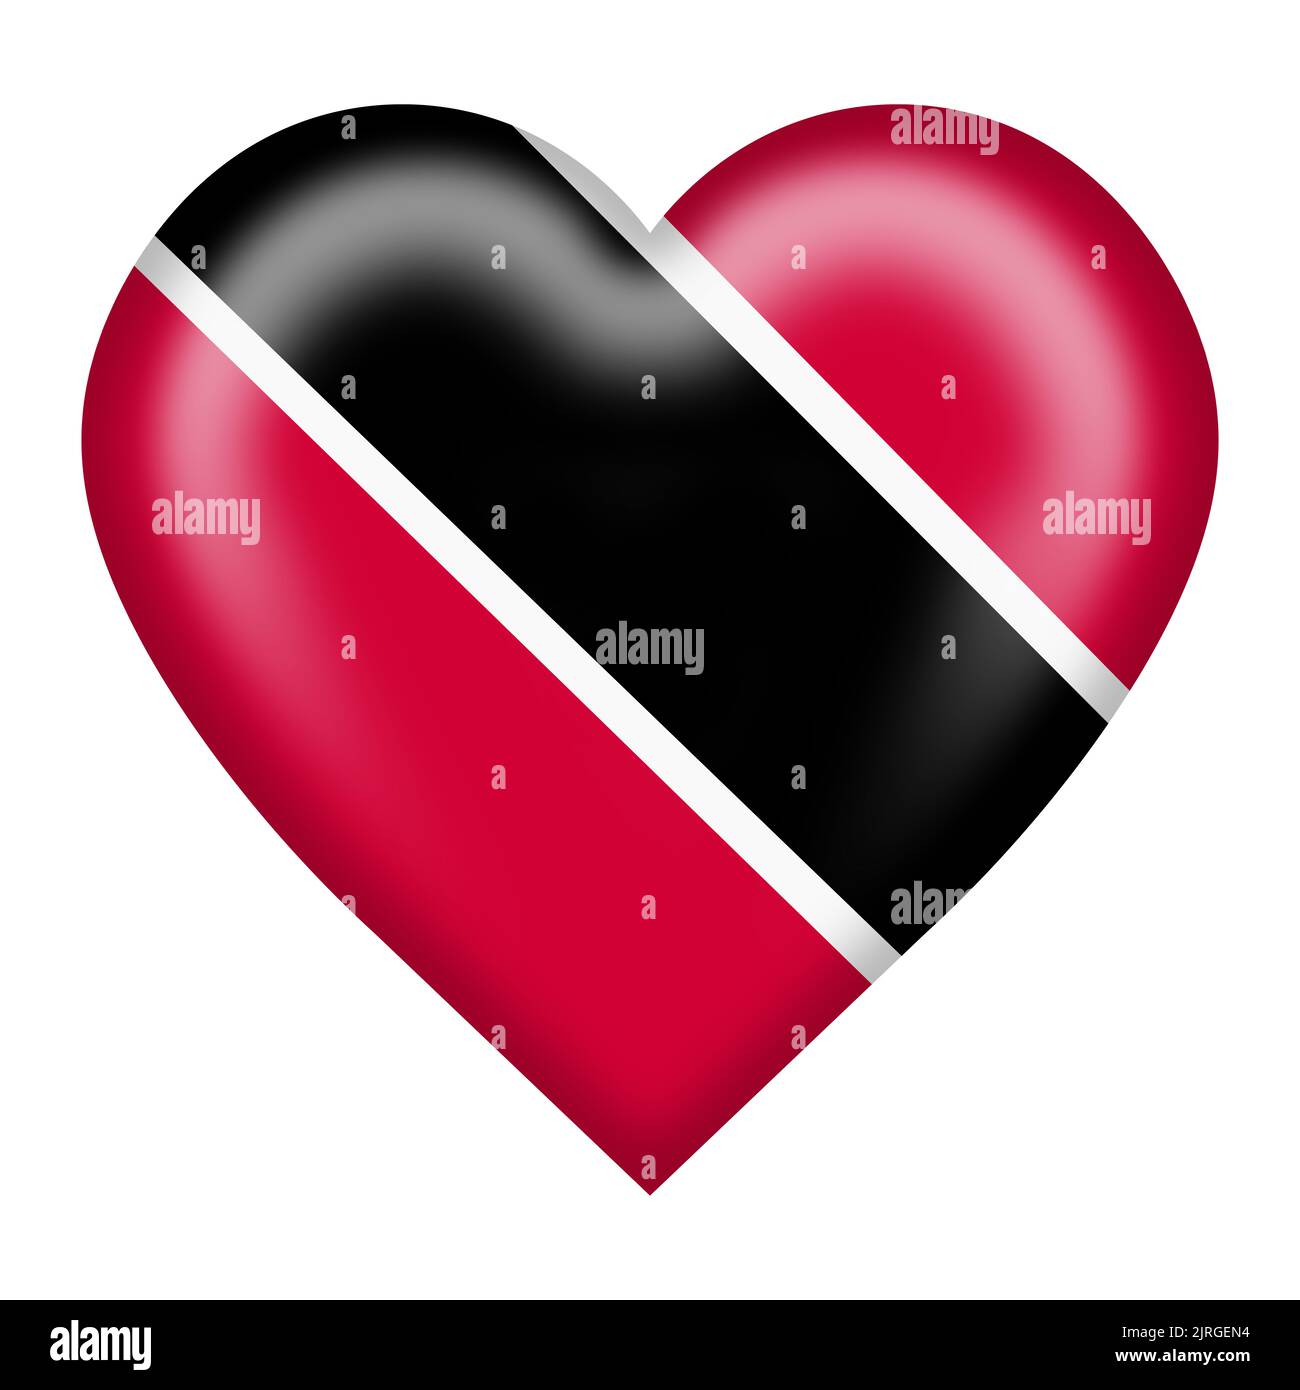 Trinidad and Tobago flag heart button 3d illustration with clipping path Stock Photo